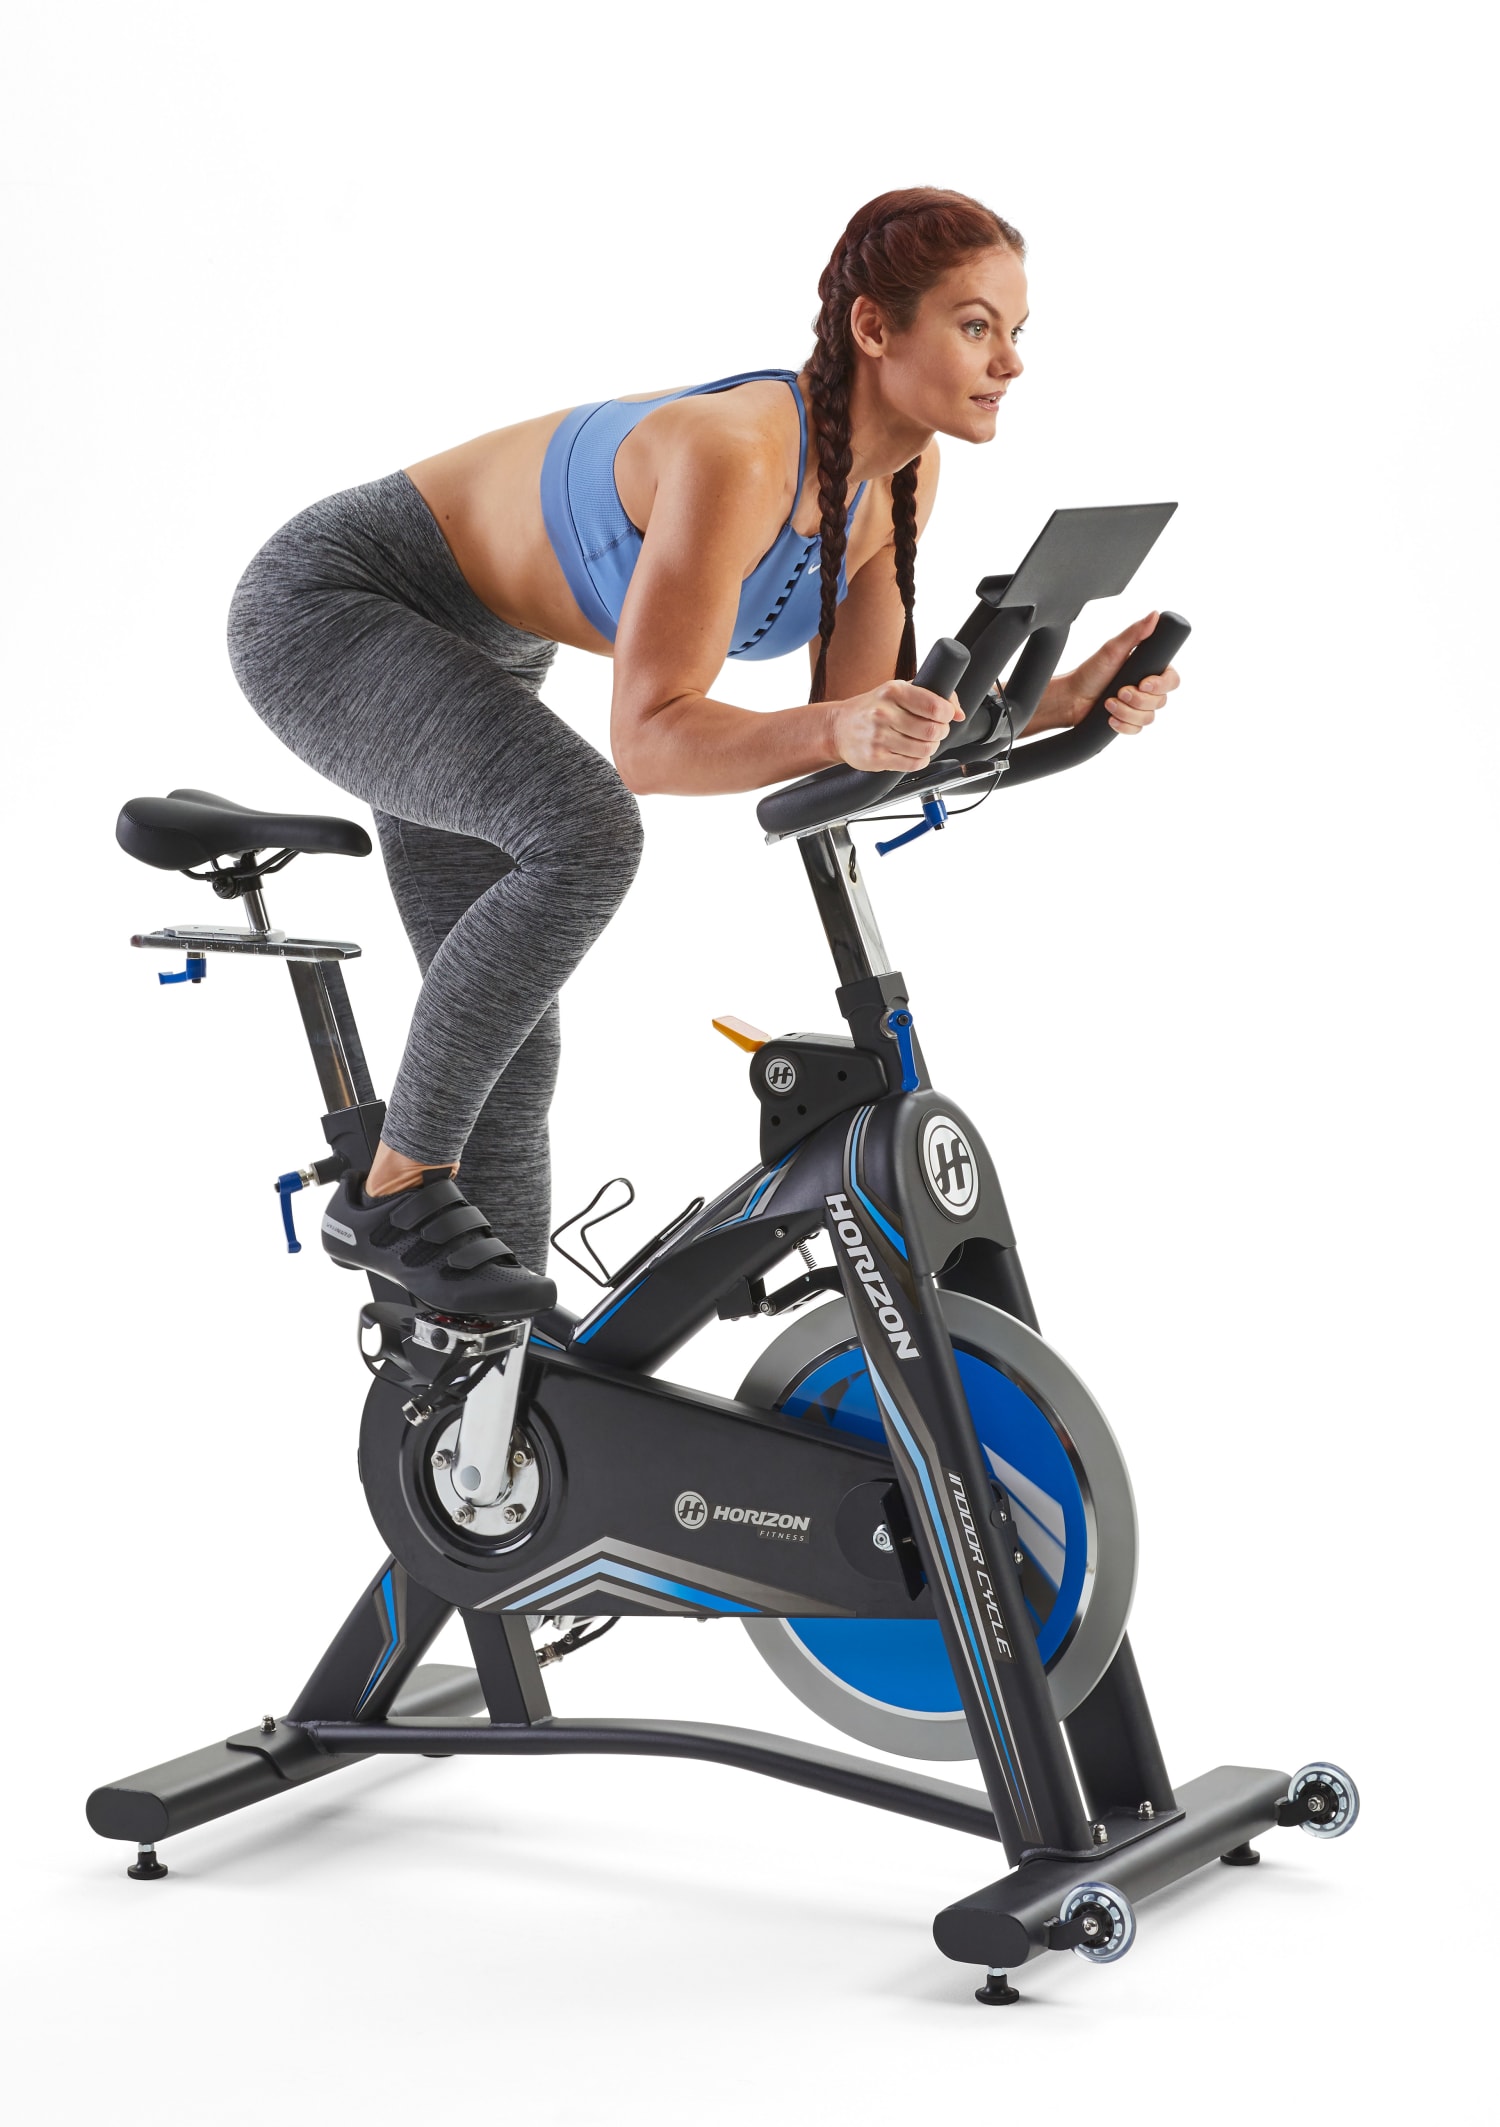 NEW Indoor Exercise Bike Stationary Cycling Bicycle Cardio Fitness 